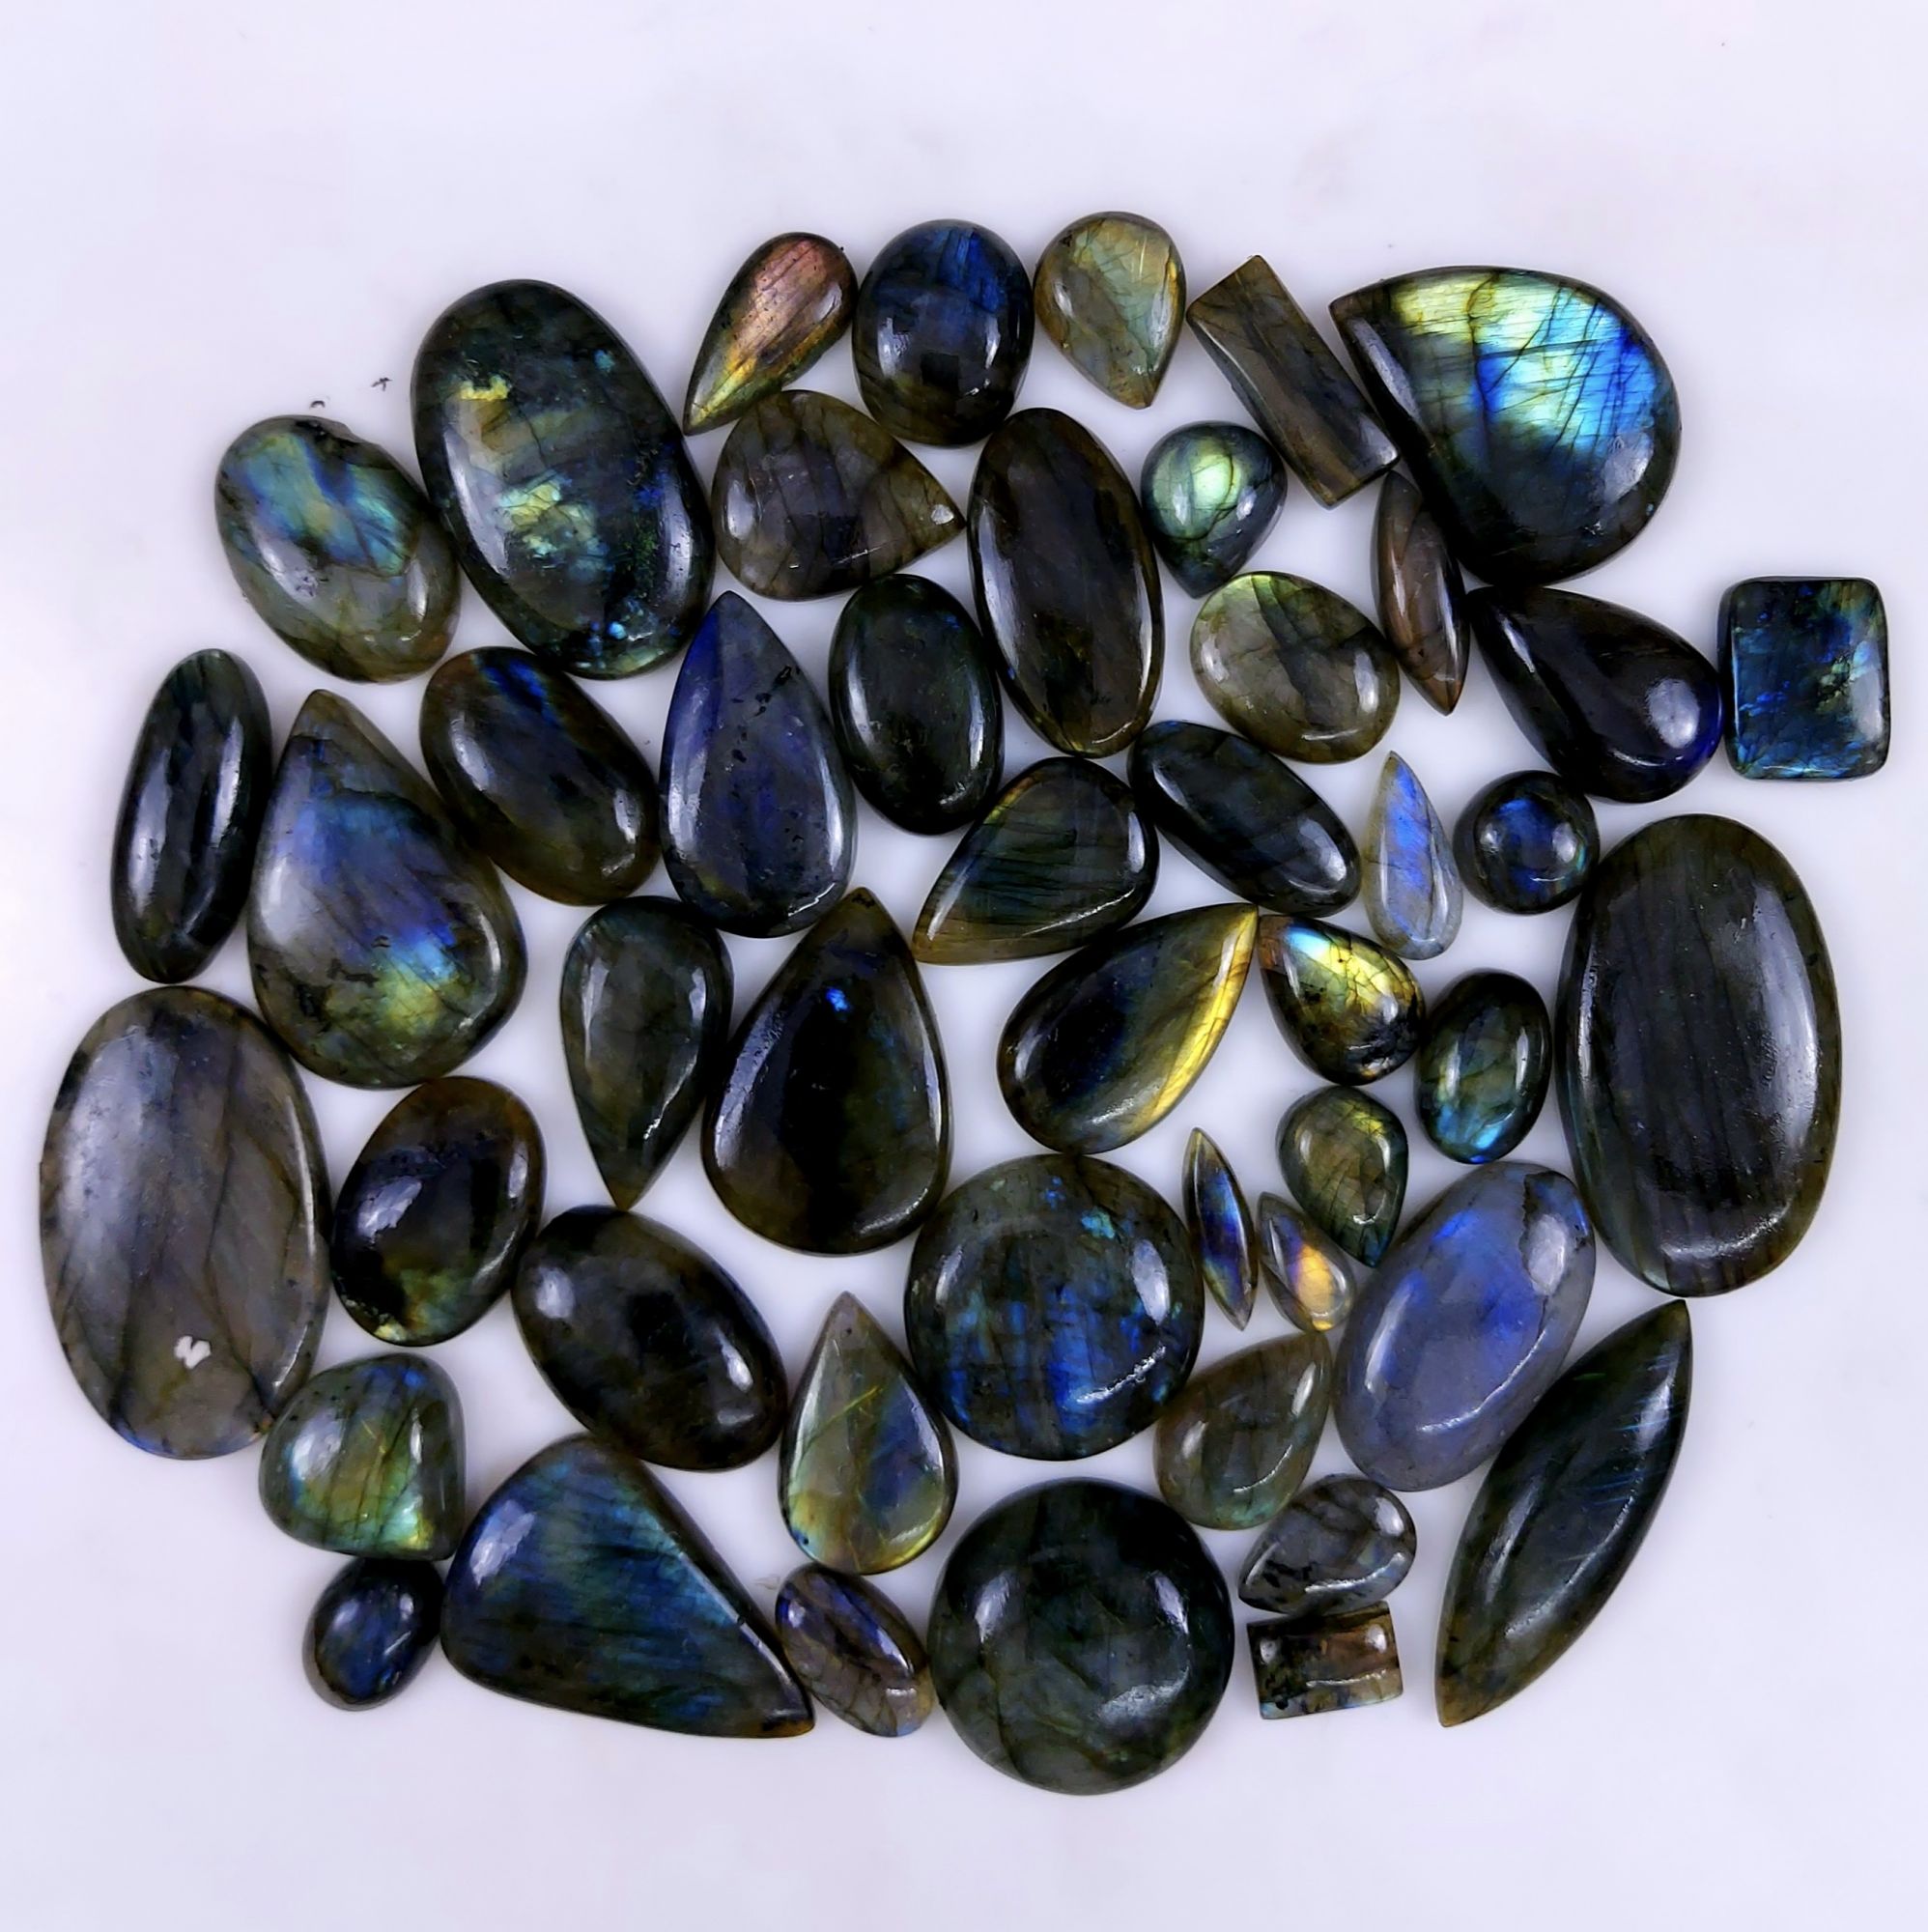 23pc 1495Cts Labradorite Cabochon Multifire Healing Crystal For Jewelry Supplies, Labradorite Necklace Handmade Wire Wrapped Gemstone Pendant 50x30 18x14mm#6334